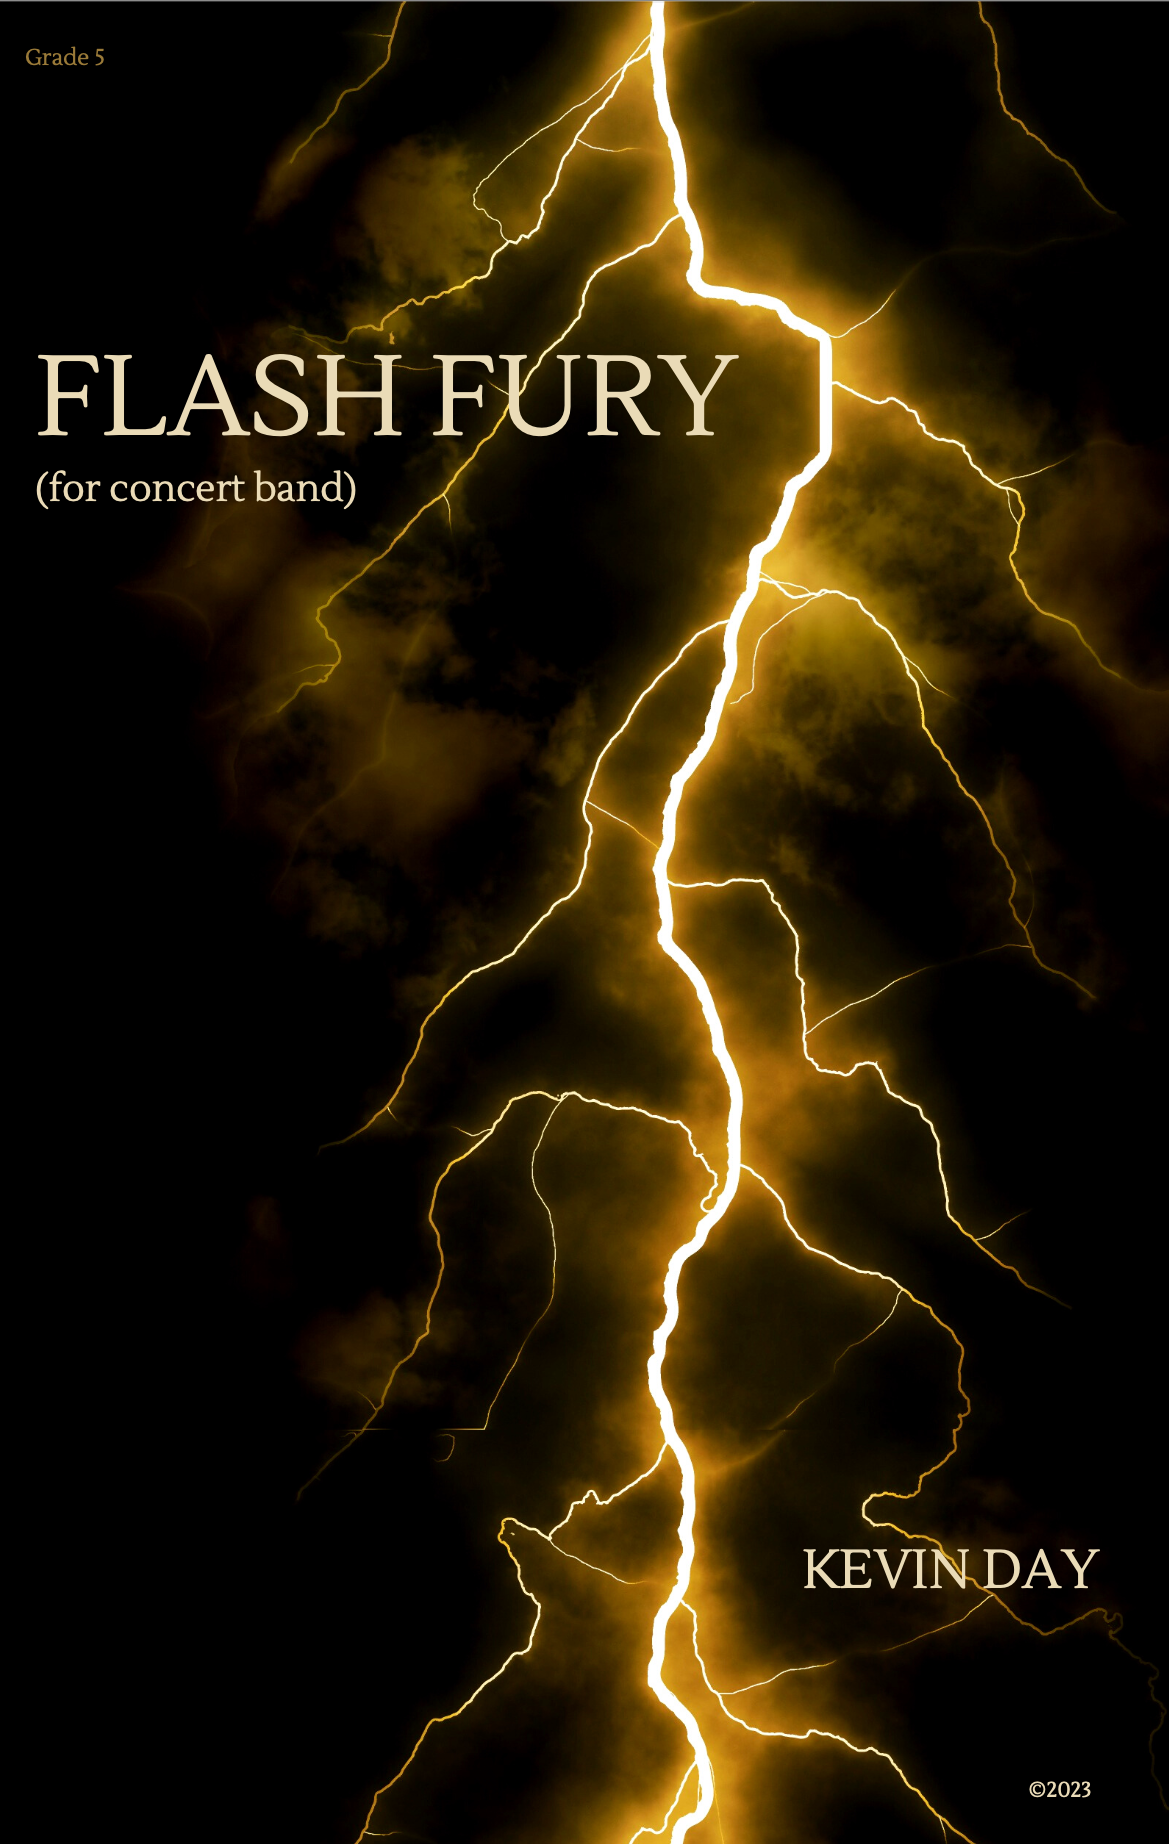 Flash Fury by Kevin Day